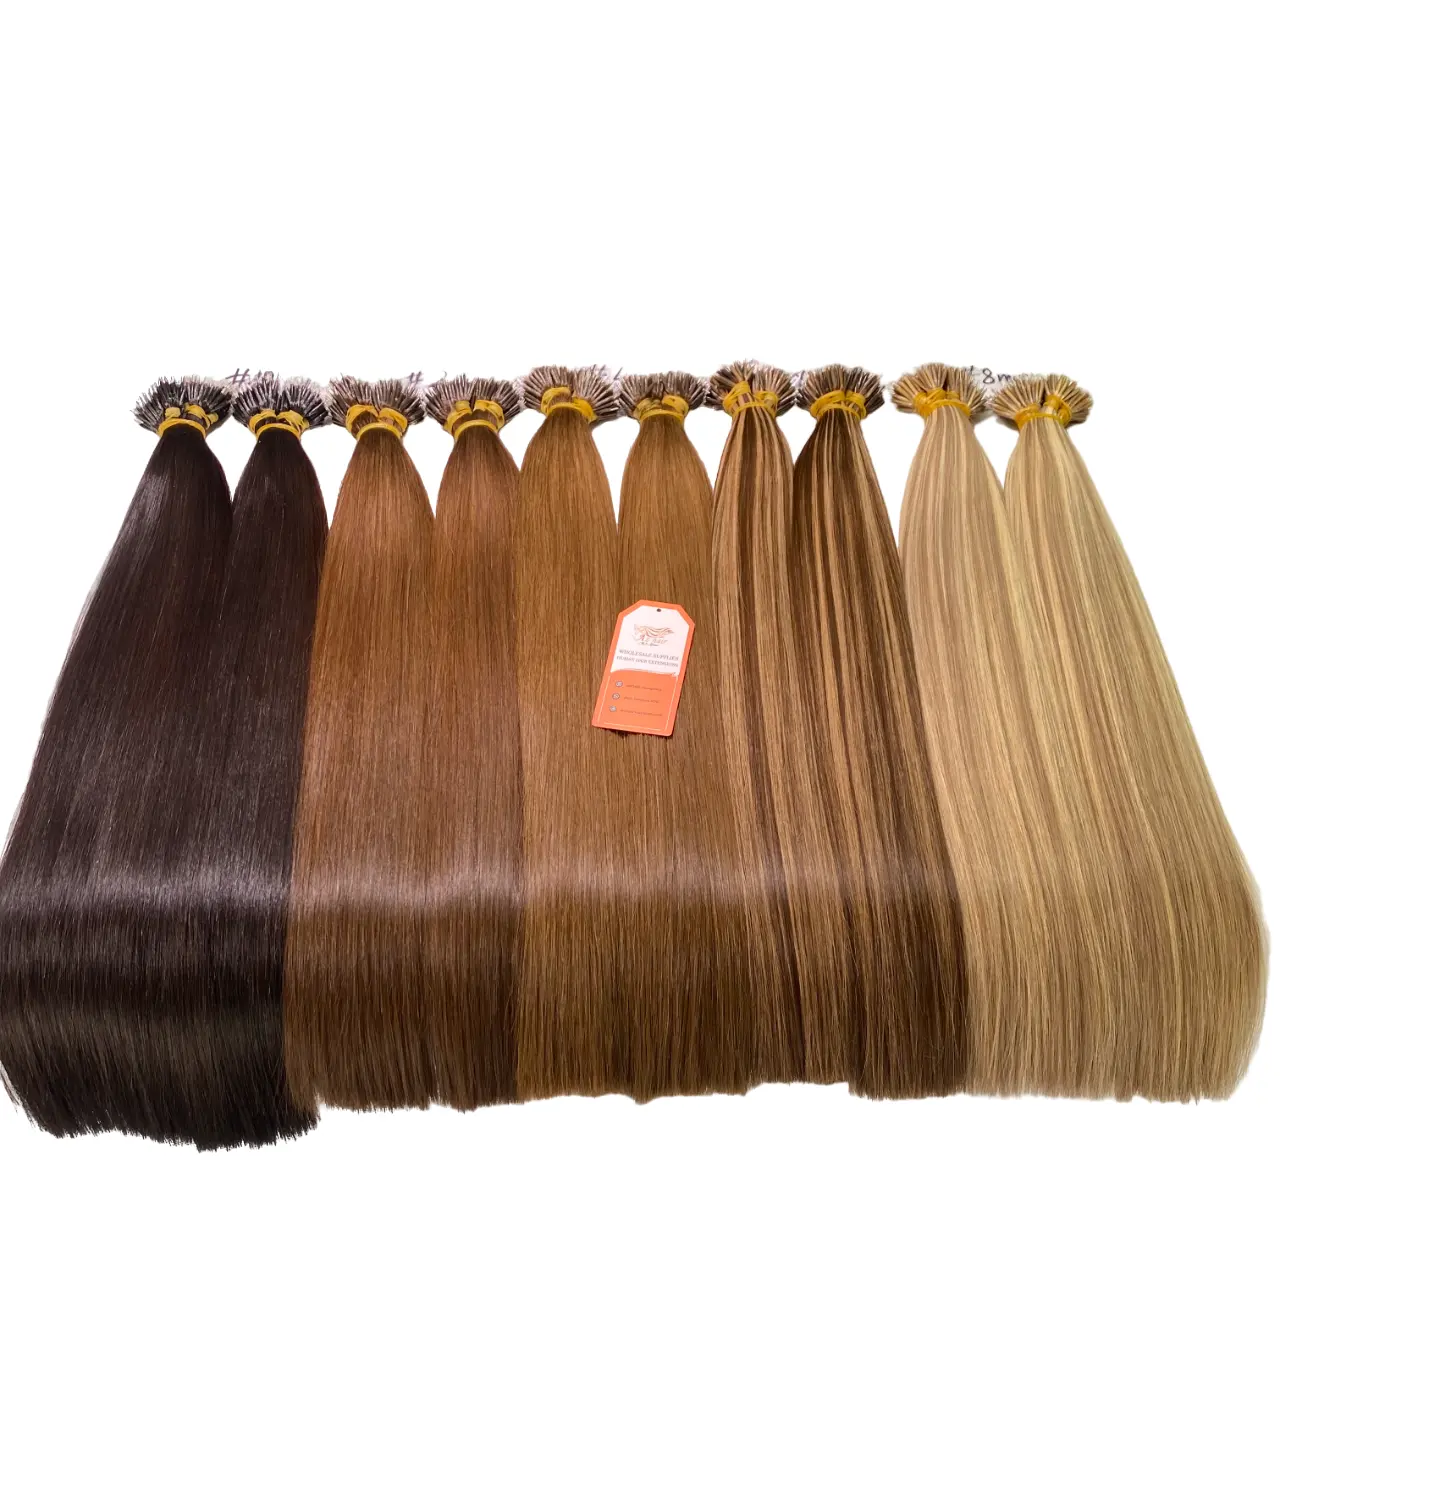 Top Quality Nano Ring Remy Human Hair Extensions Nano Tip Hair Extension From Vietnam For Sale